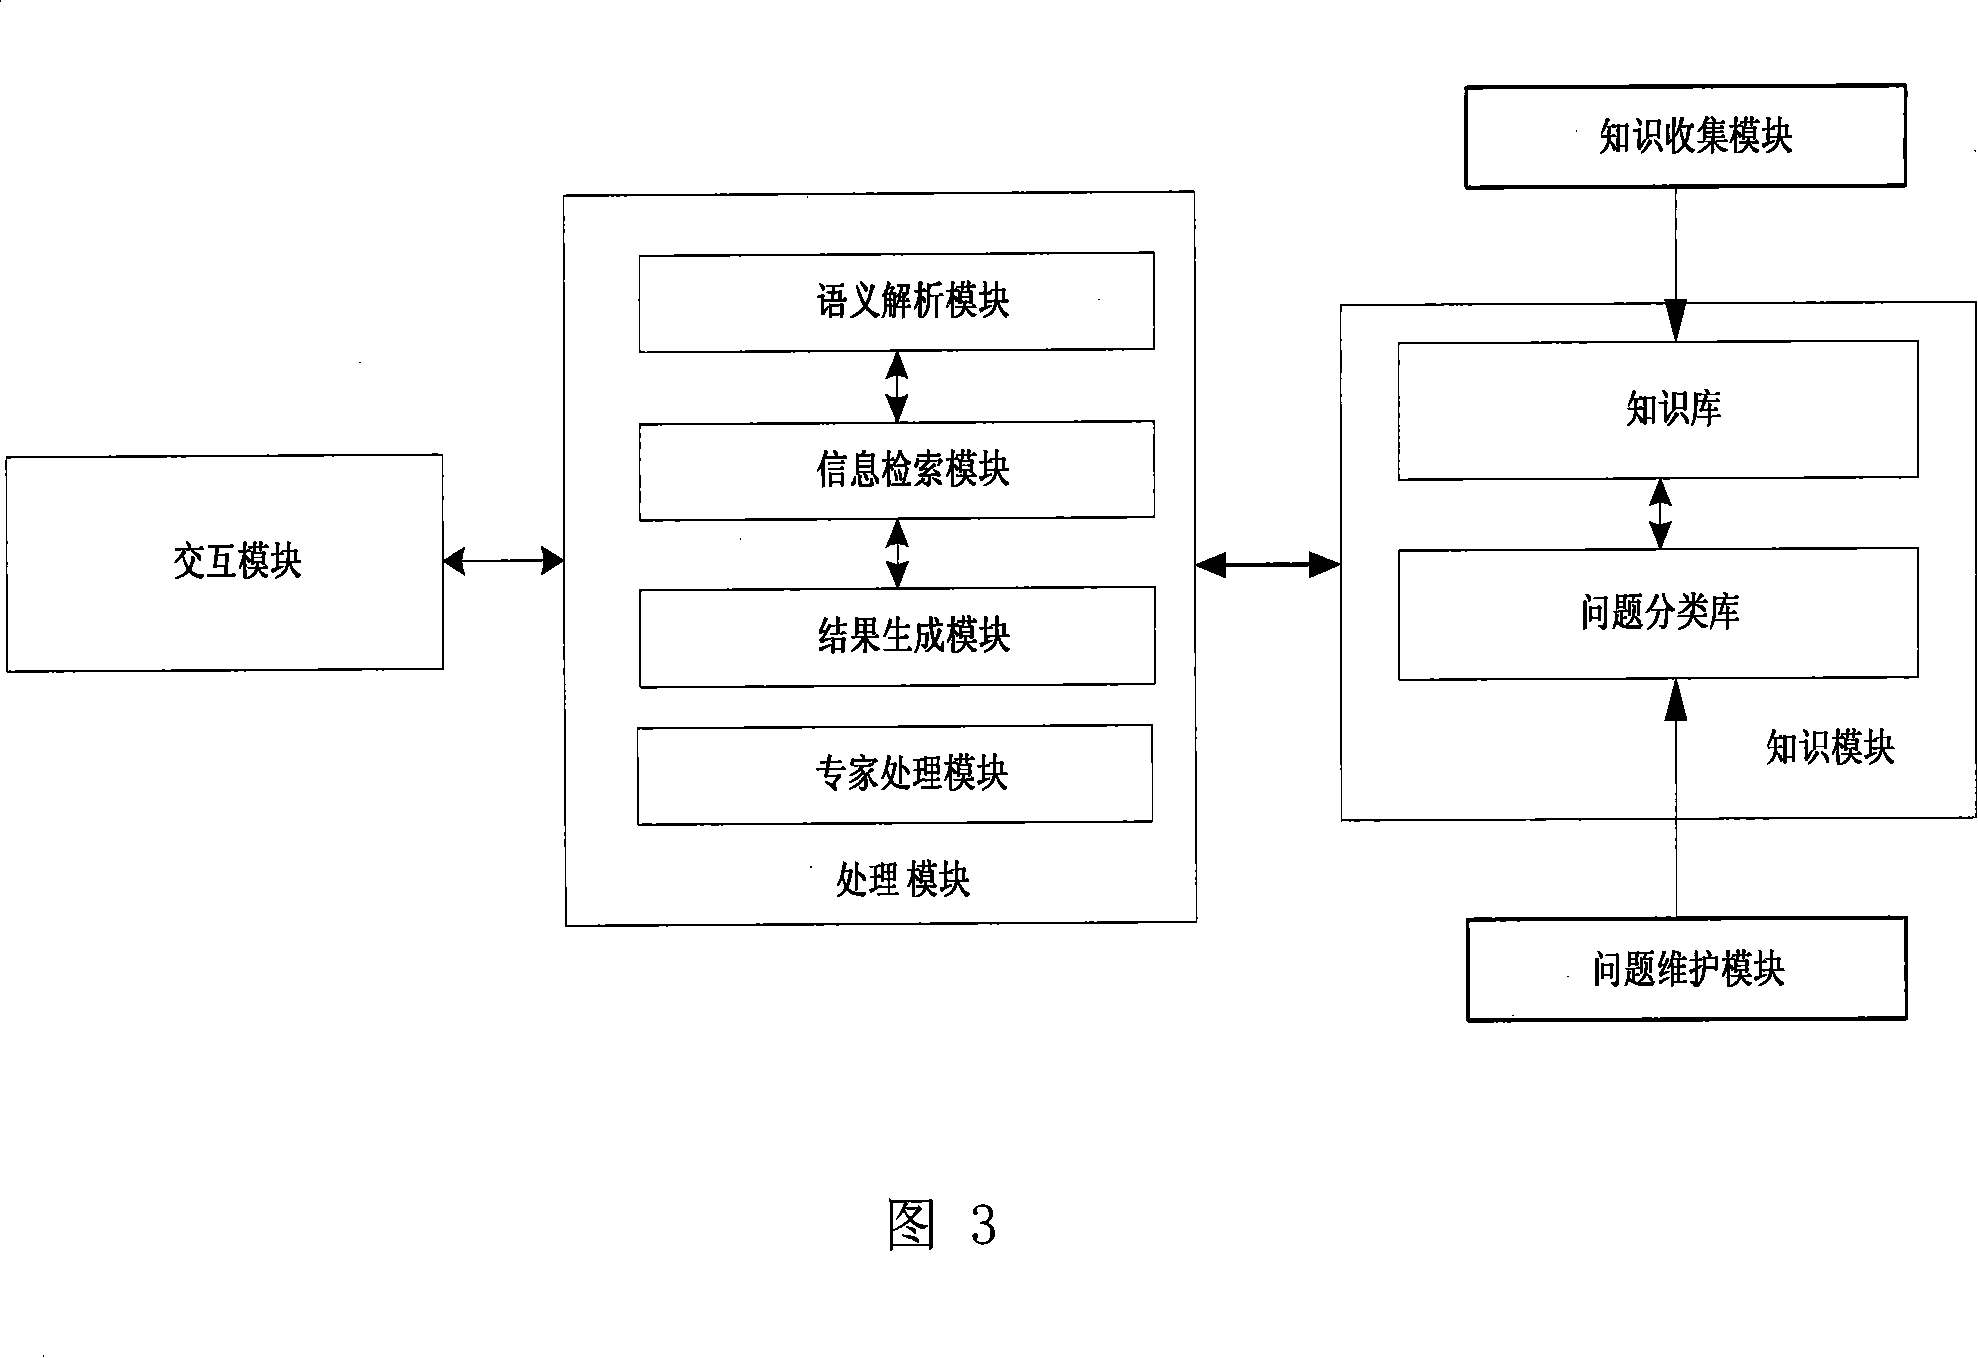 Intelligent interactive request-answering system and processing method thereof